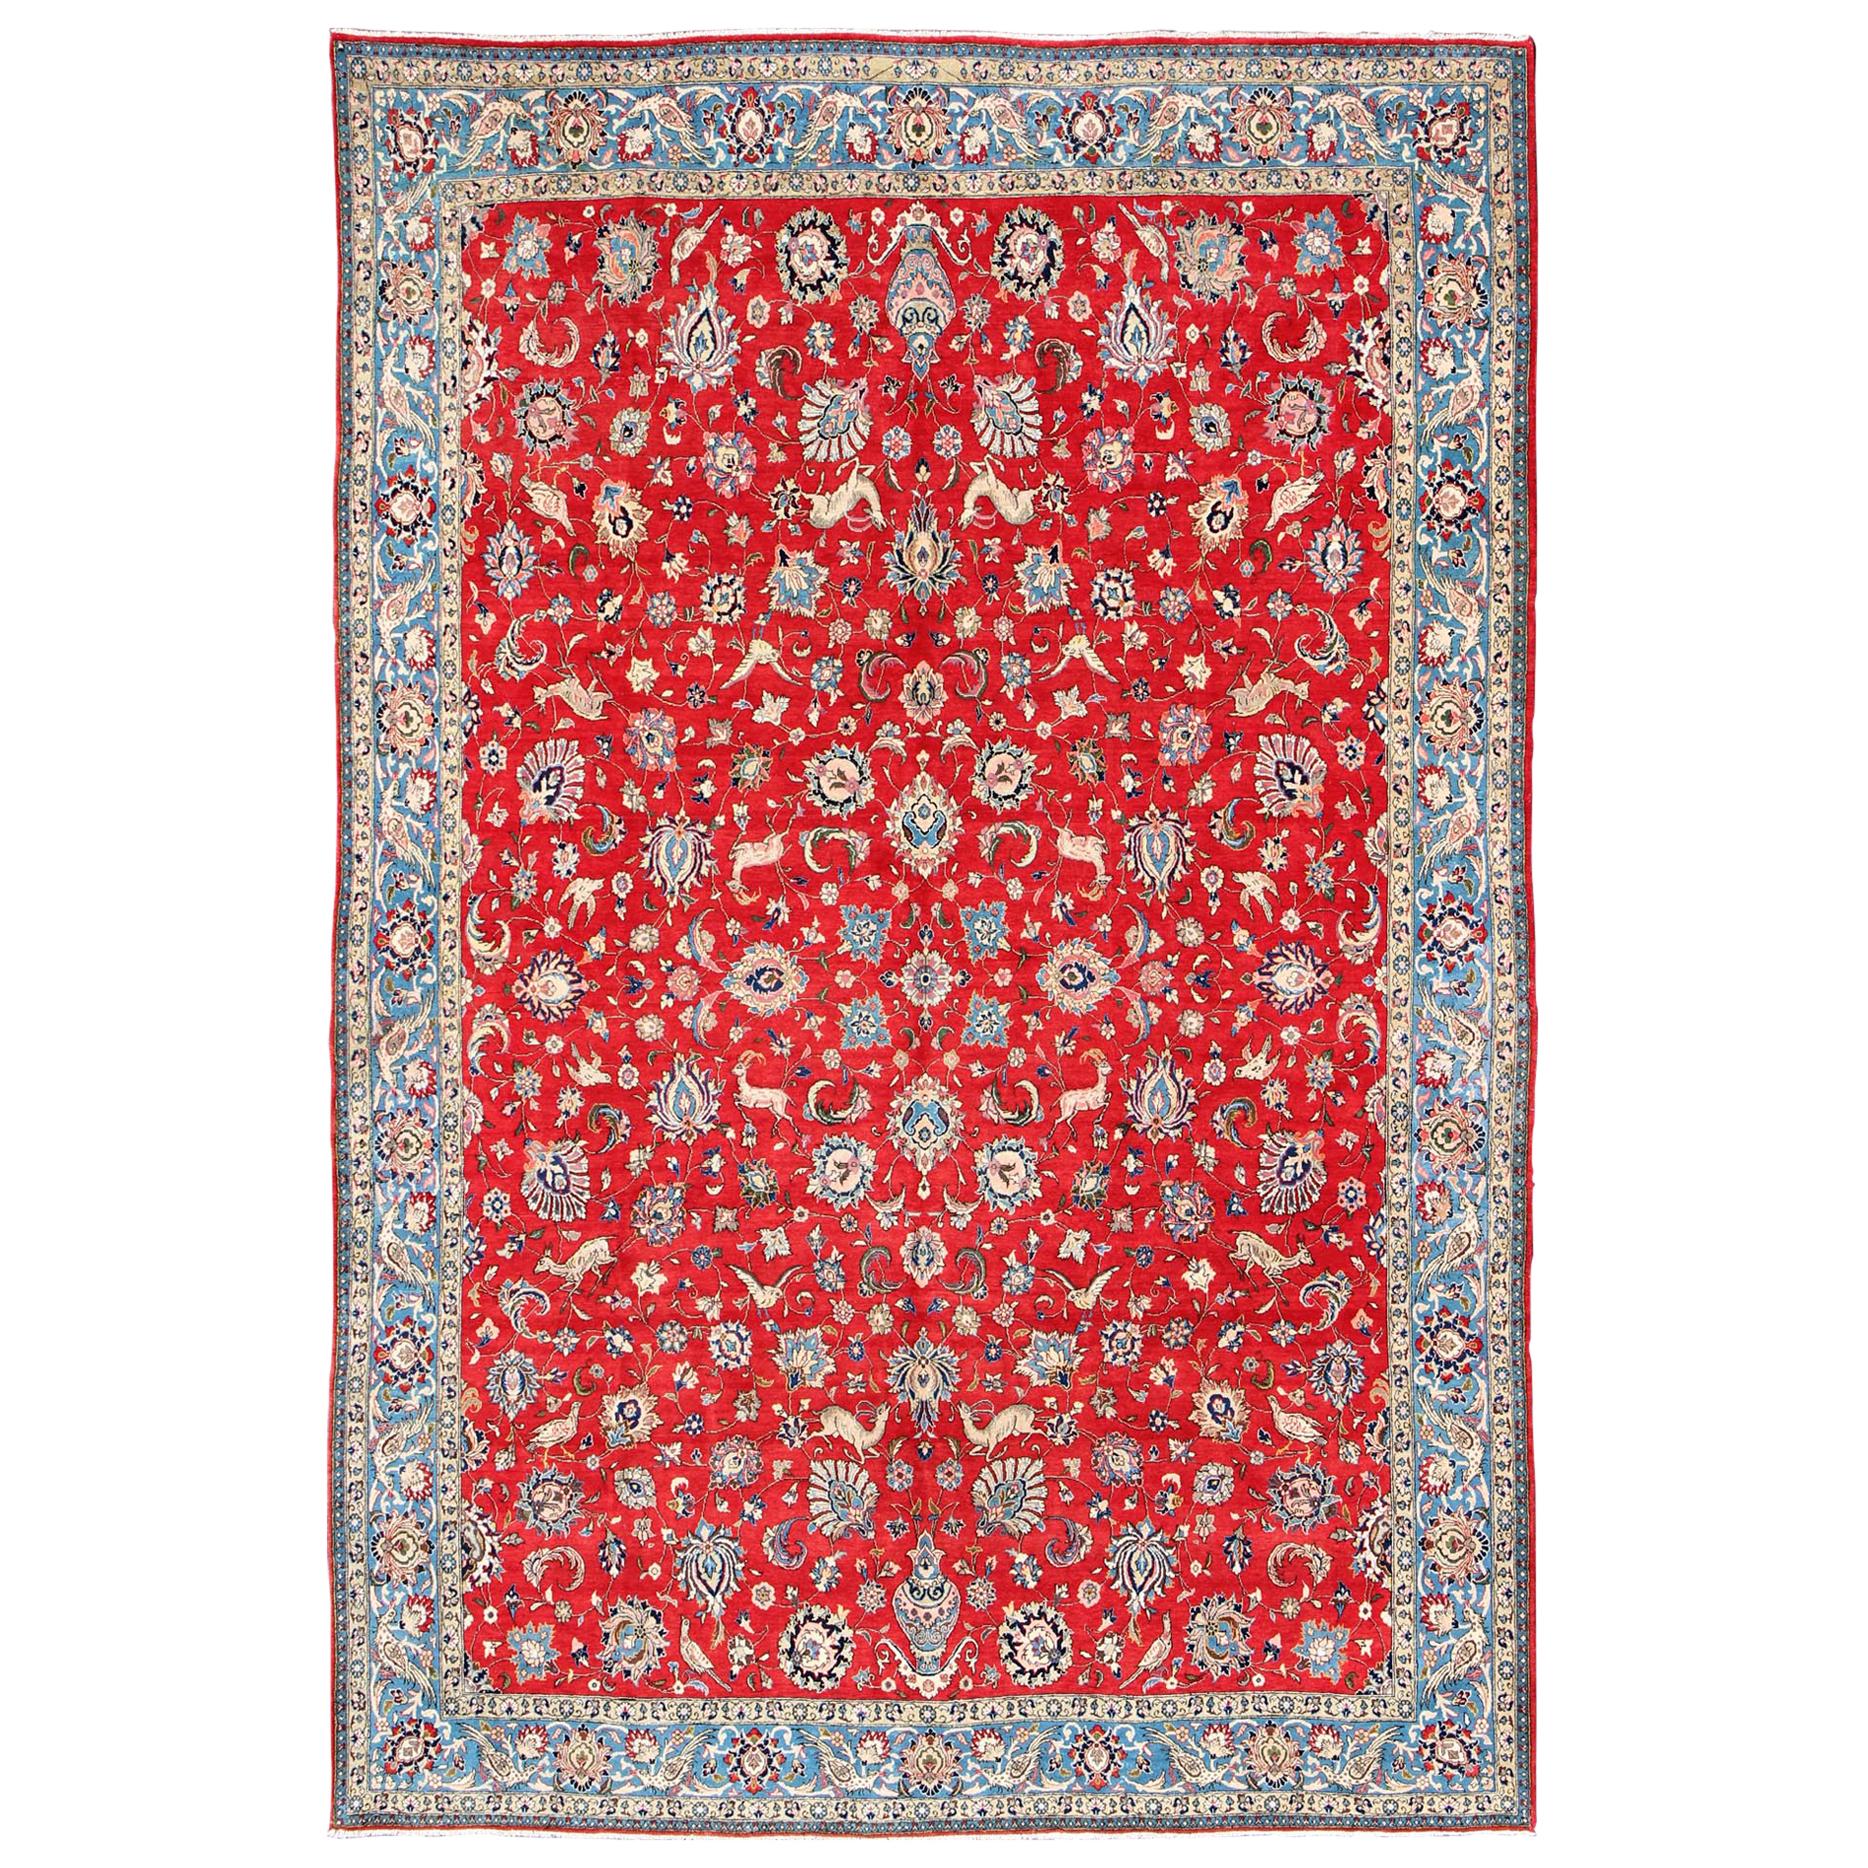 Fine Persian Isfahan Rug with All-Over Floral Design in Red Background